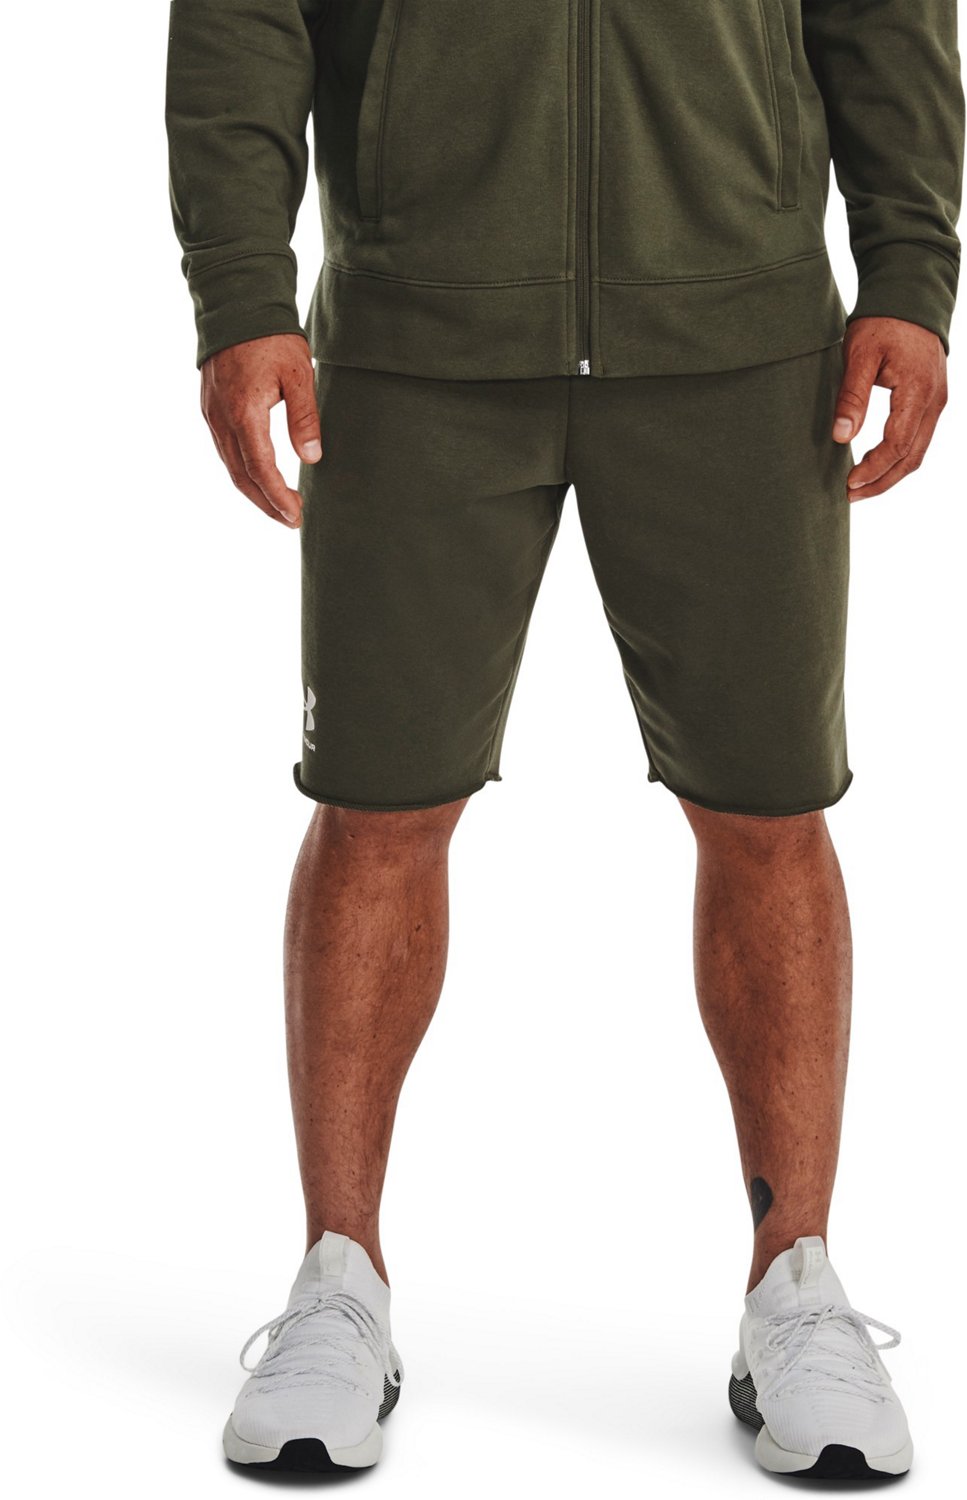 Under Armour Mens Rival Terry Shorts 10 in.